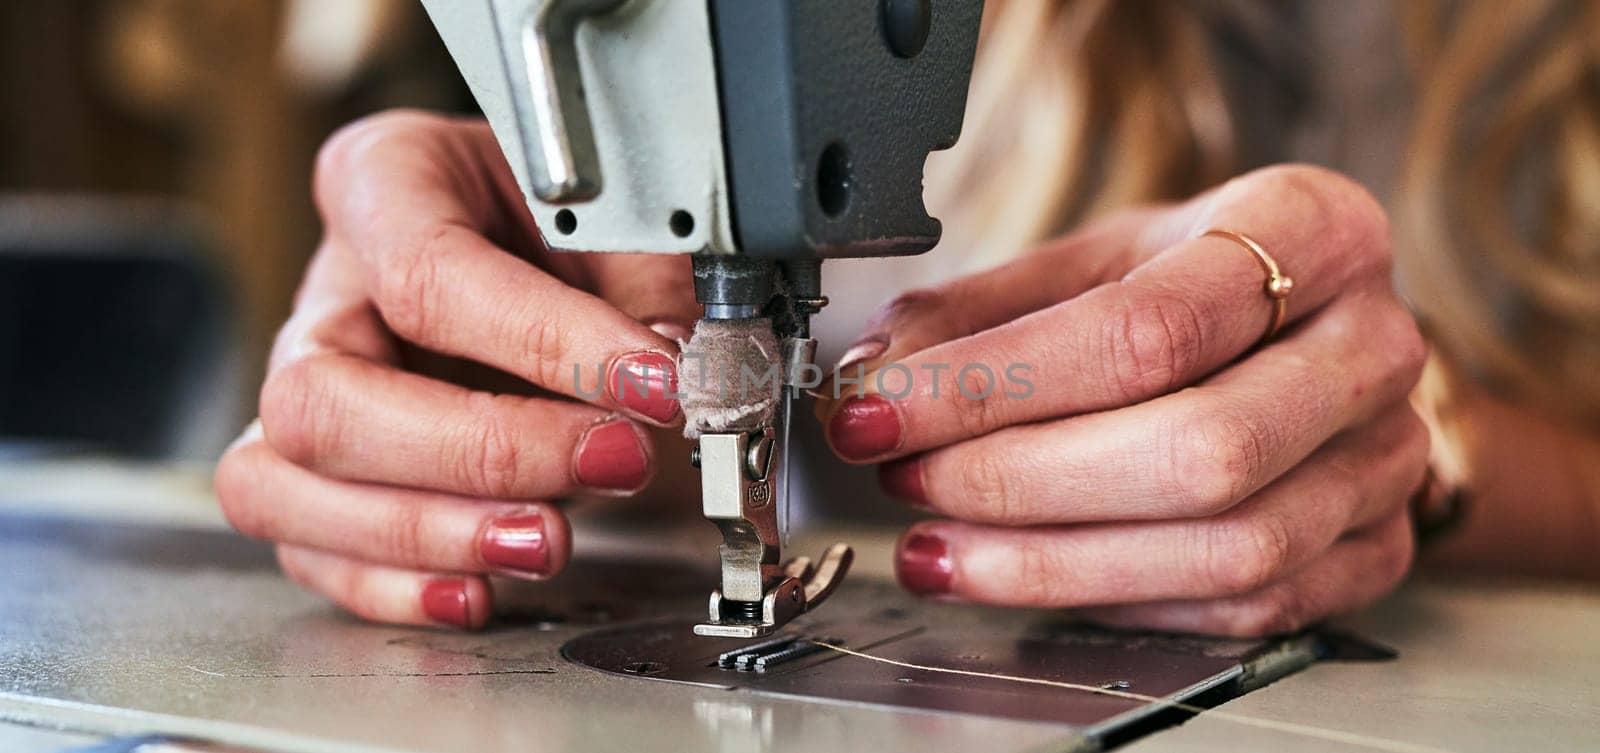 Life is better when you sew. a young fashion designer using a sewing machine in her workshop